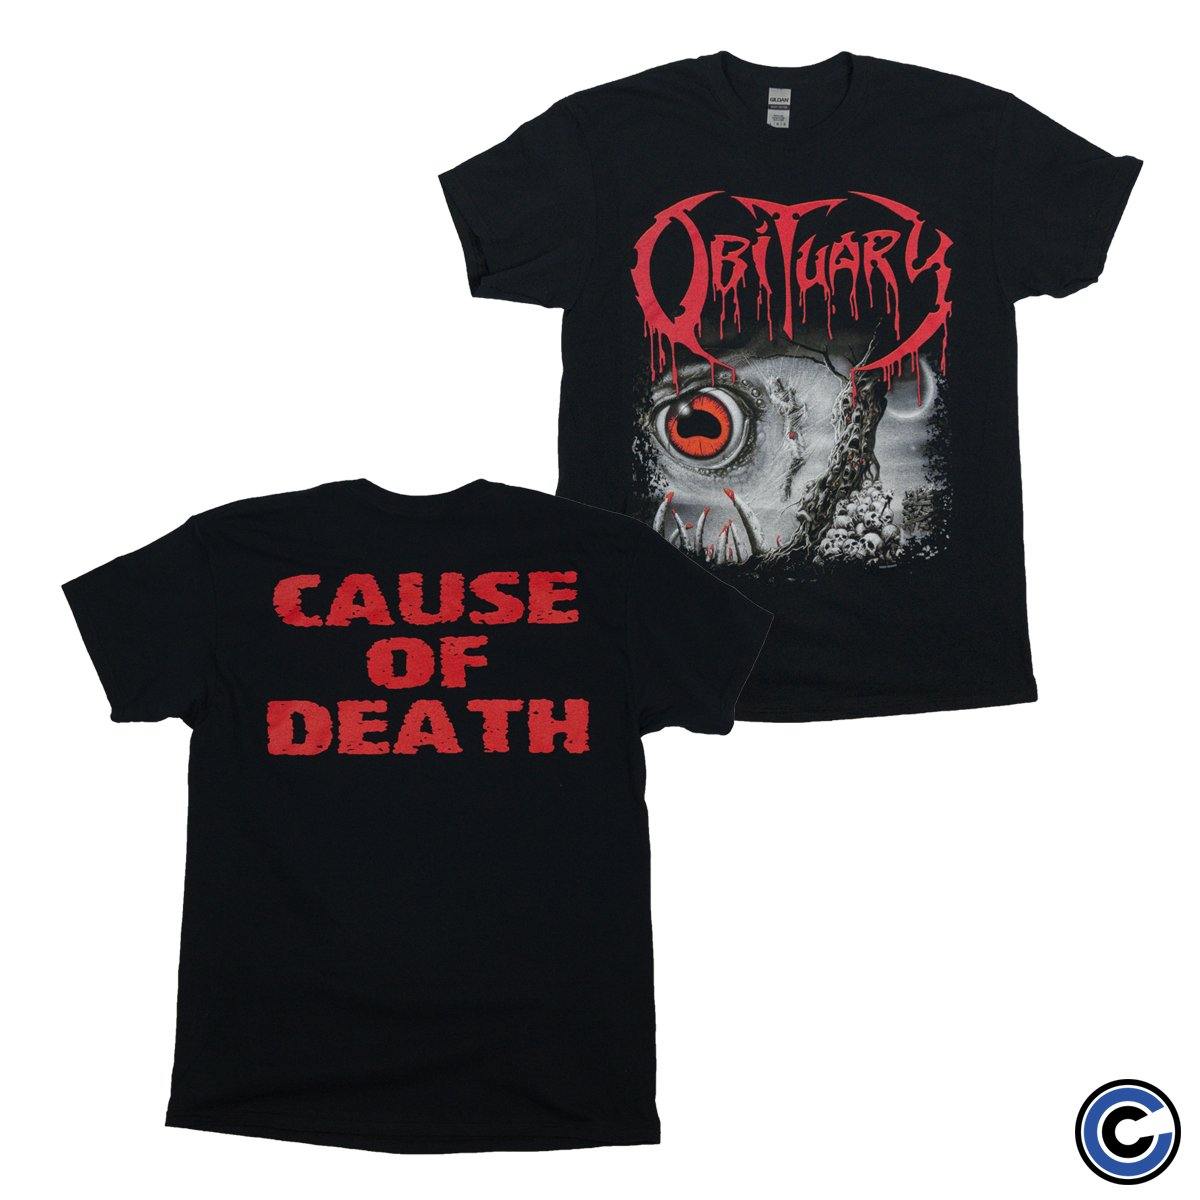 Buy – Obituary "Cause of Death" Shirt – Band & Music Merch – Cold Cuts Merch